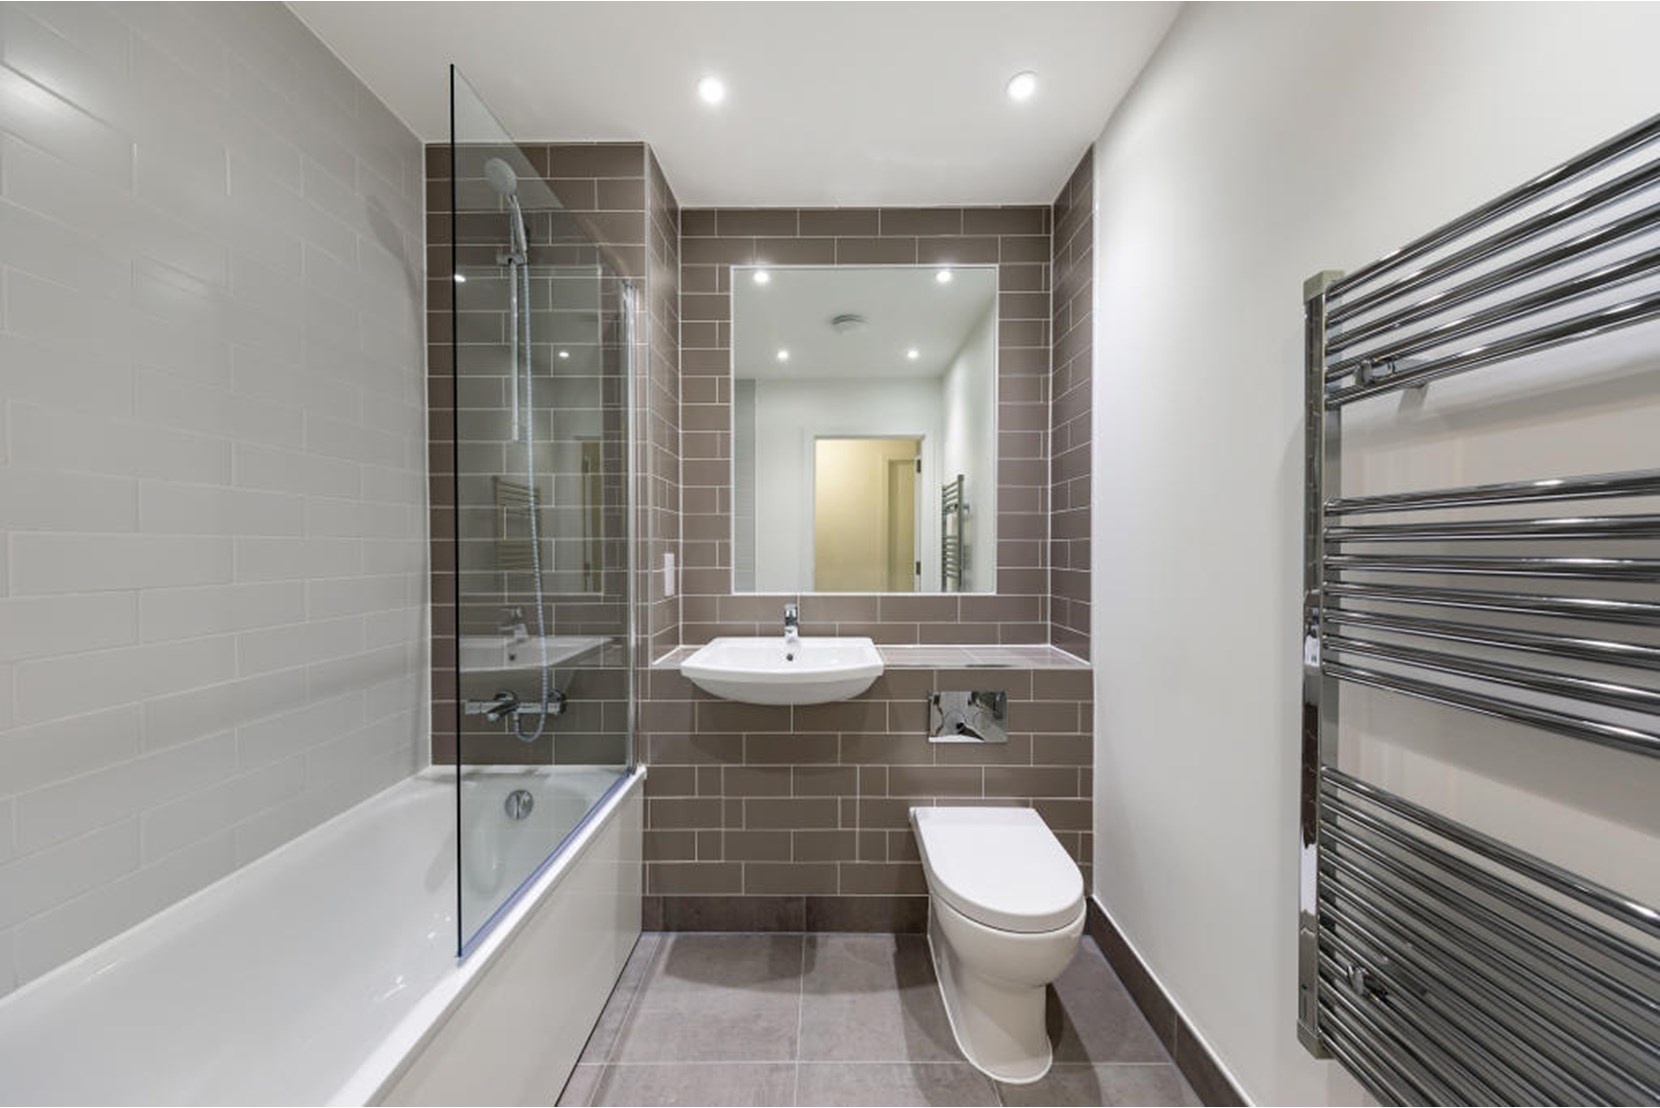 Apartments to Rent by Hera at Basalt Court, Romford, RM7, bathroom